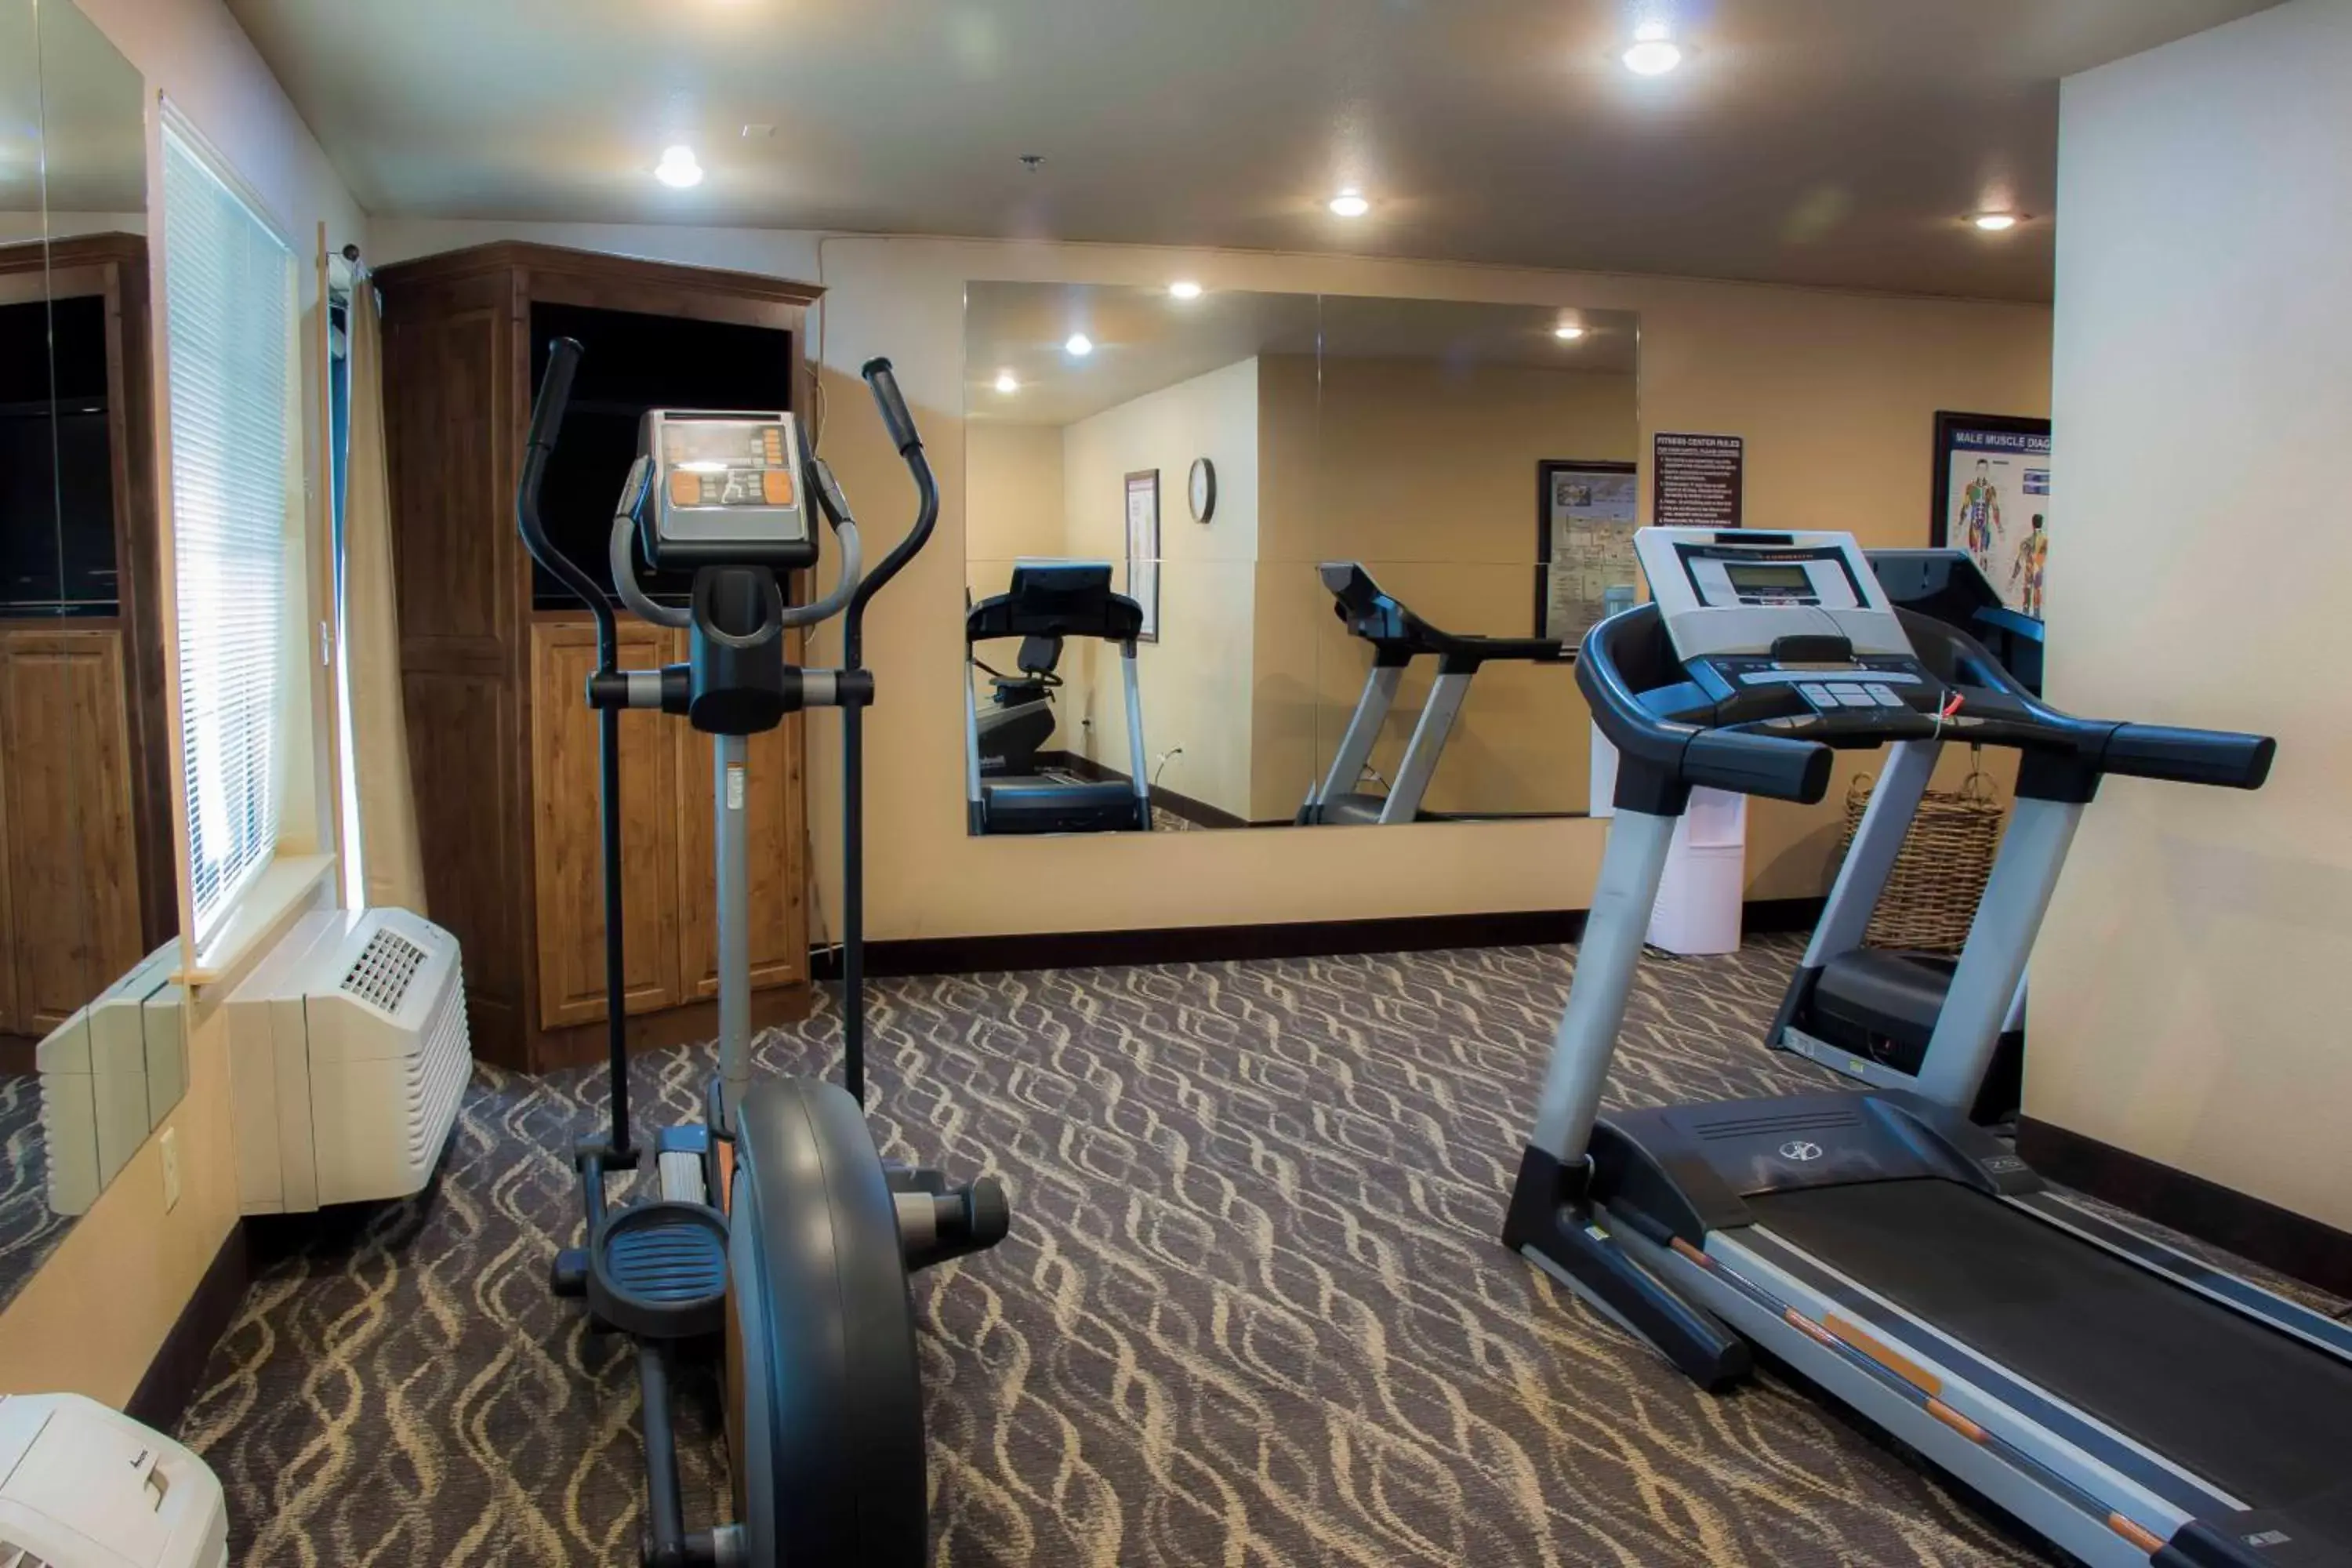 Fitness centre/facilities, Fitness Center/Facilities in Bitterroot River Inn and Conference Center